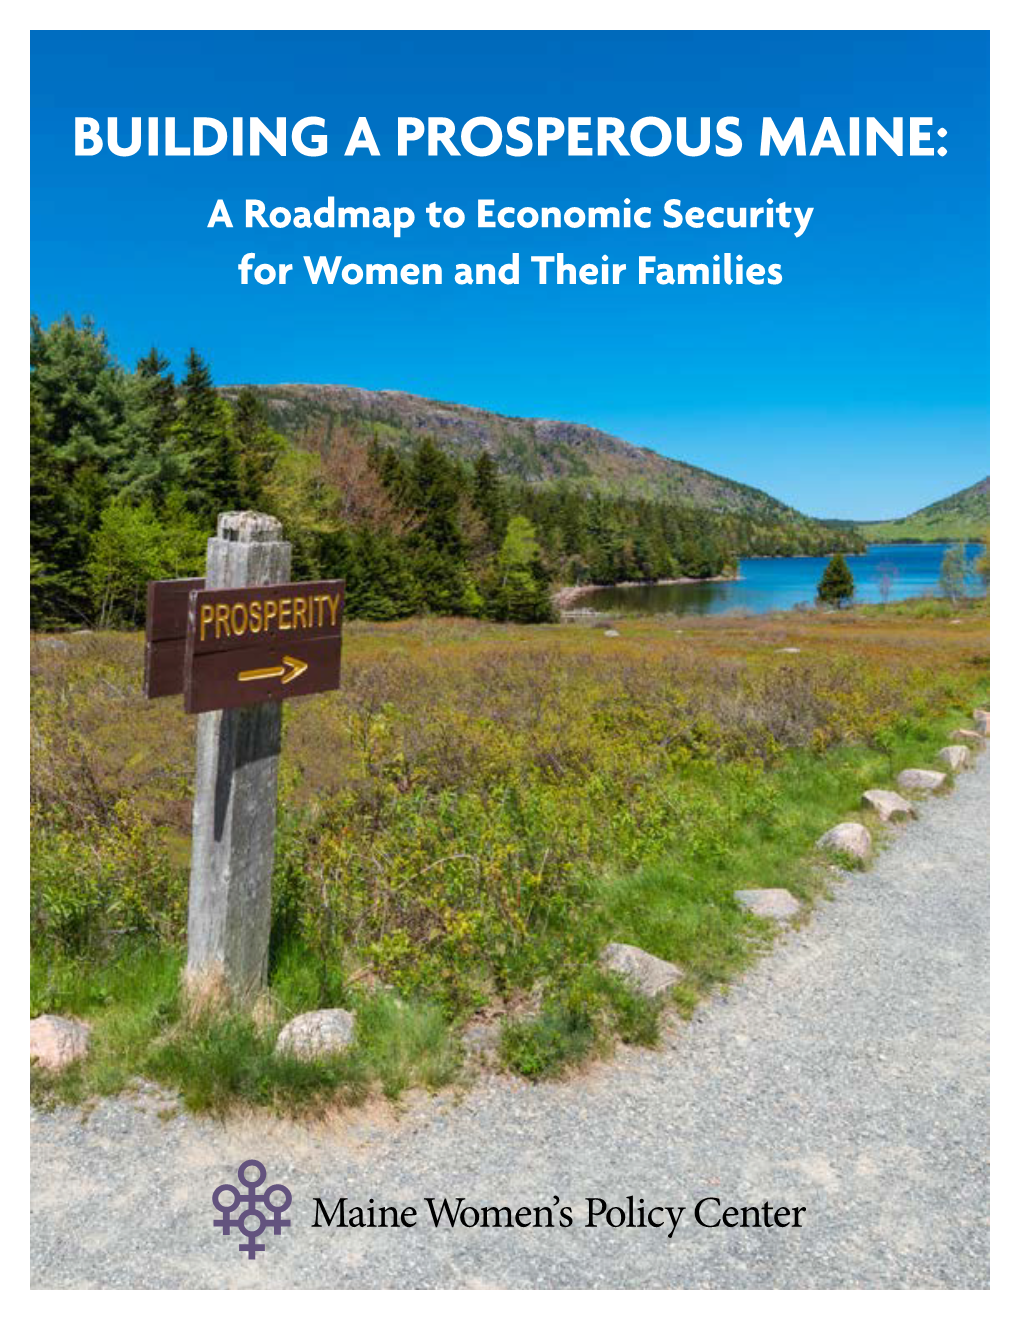 BUILDING a PROSPEROUS MAINE: a Roadmap to Economic Security for Women and Their Families